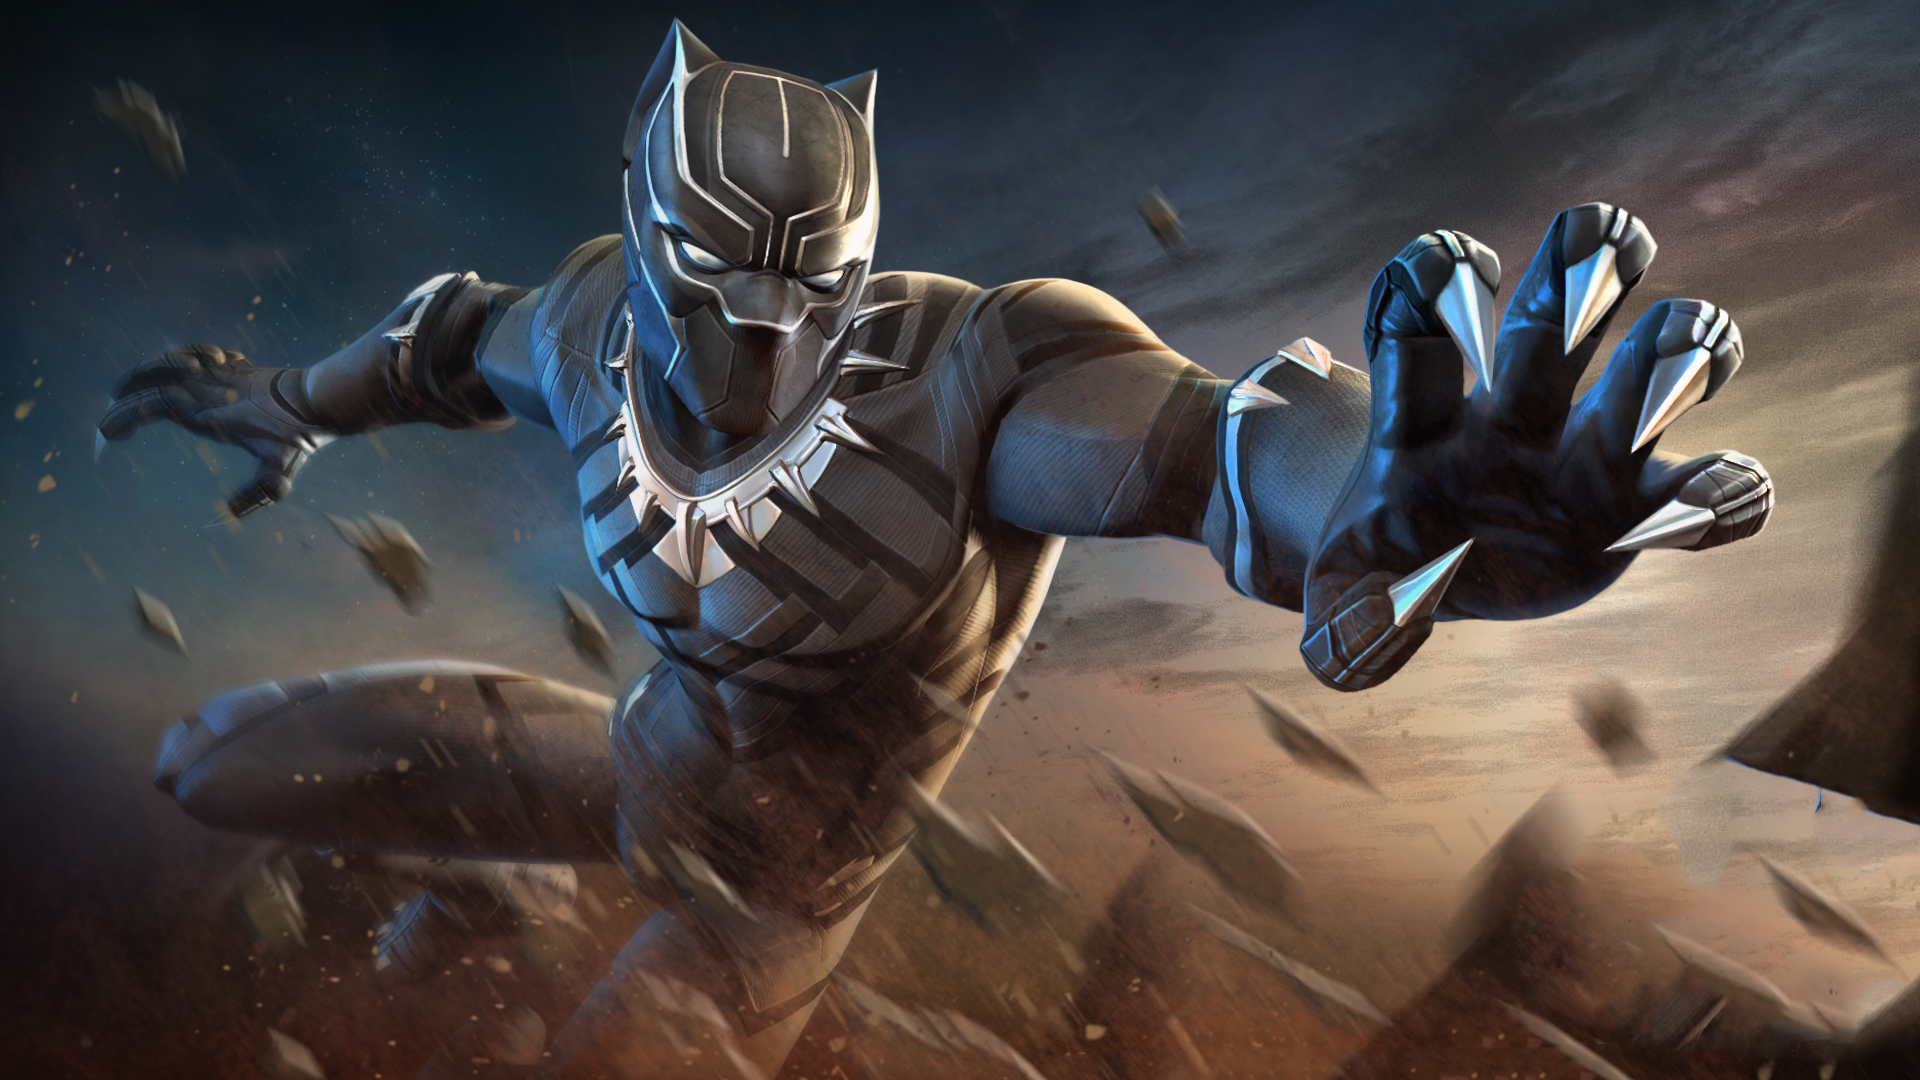 Black Panther Marvel Contest of Champions9411711682 - Black Panther Marvel Contest of Champions - Panther, Marvel, Contest, Chavez, Champions, Black